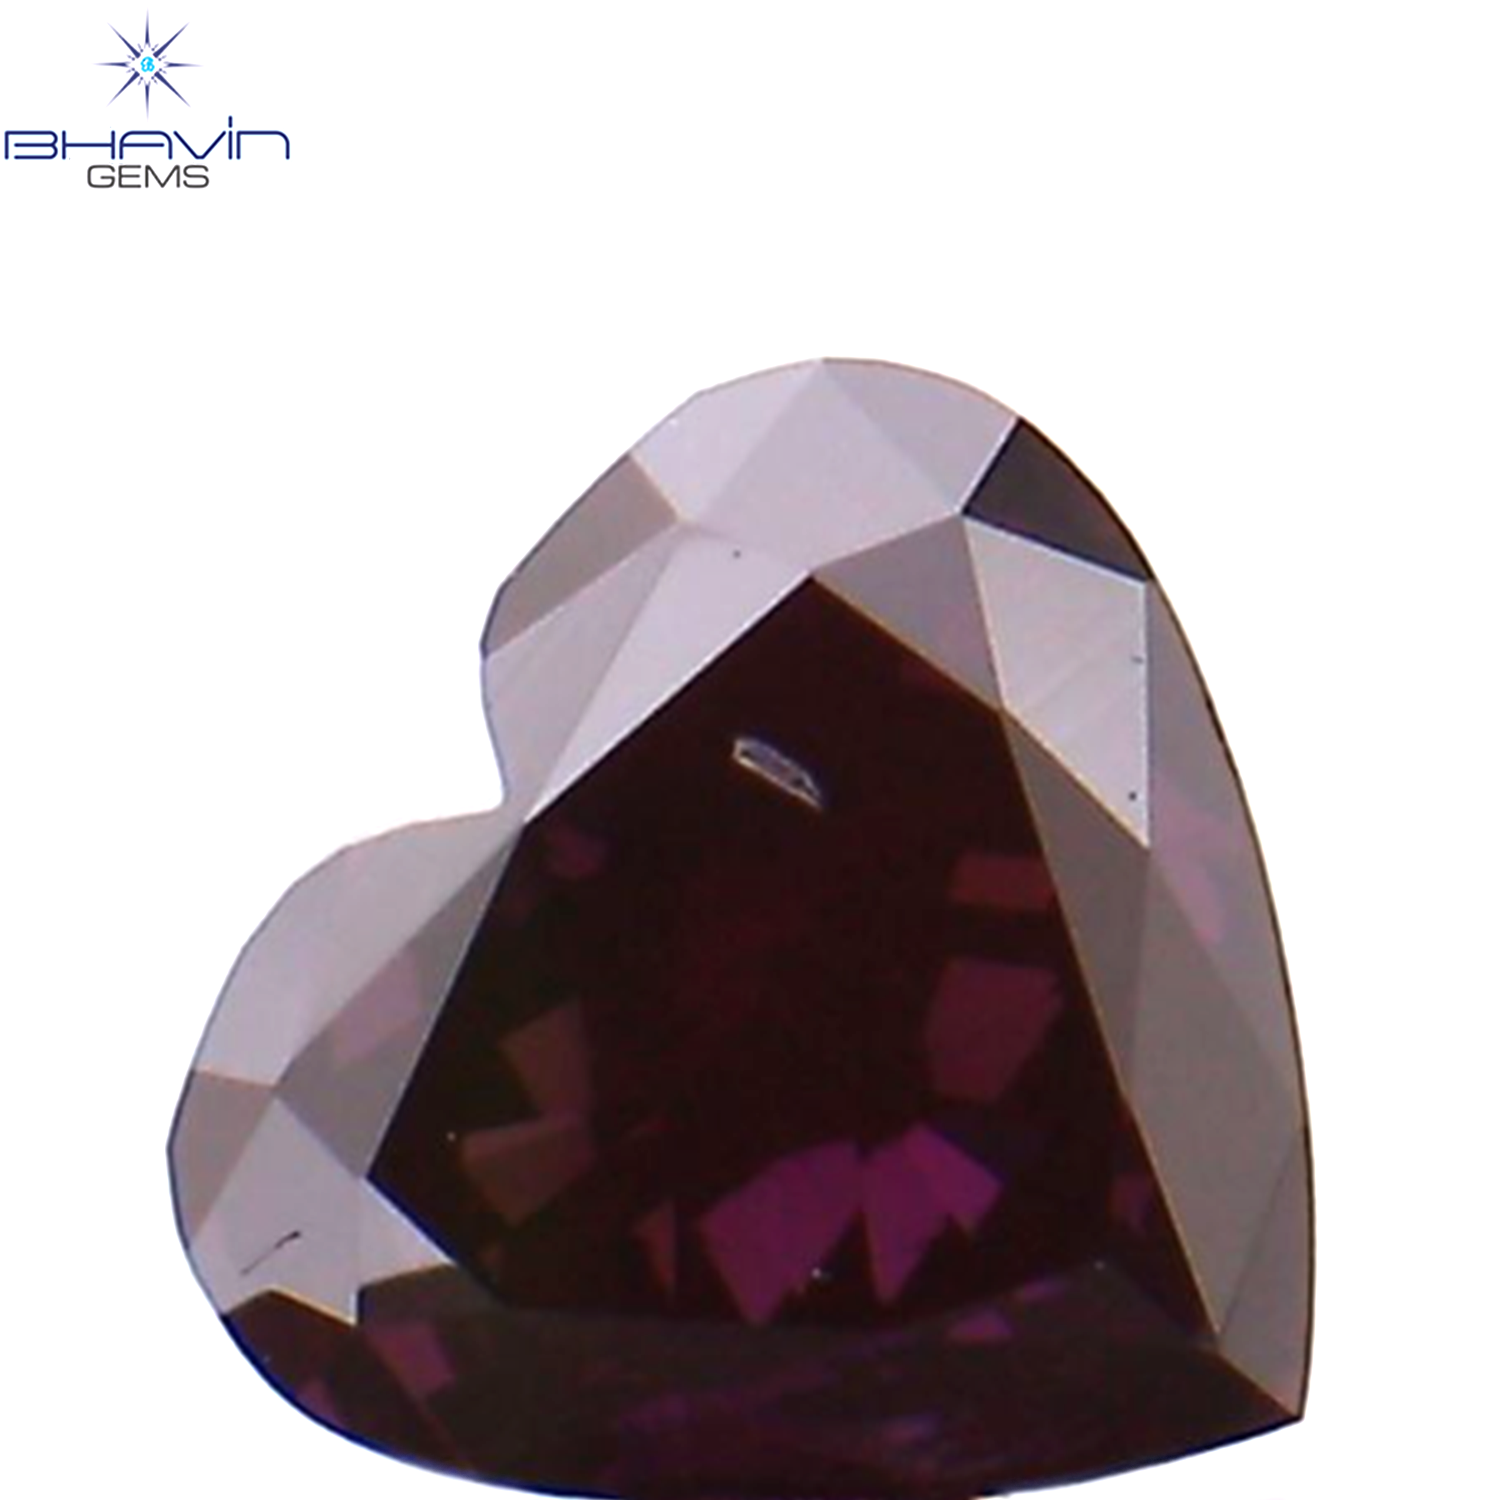 0.19 CT Heart Shape Enhanced Pink Color Natural Loose Diamond SI1 Clarity (3.54 MM)